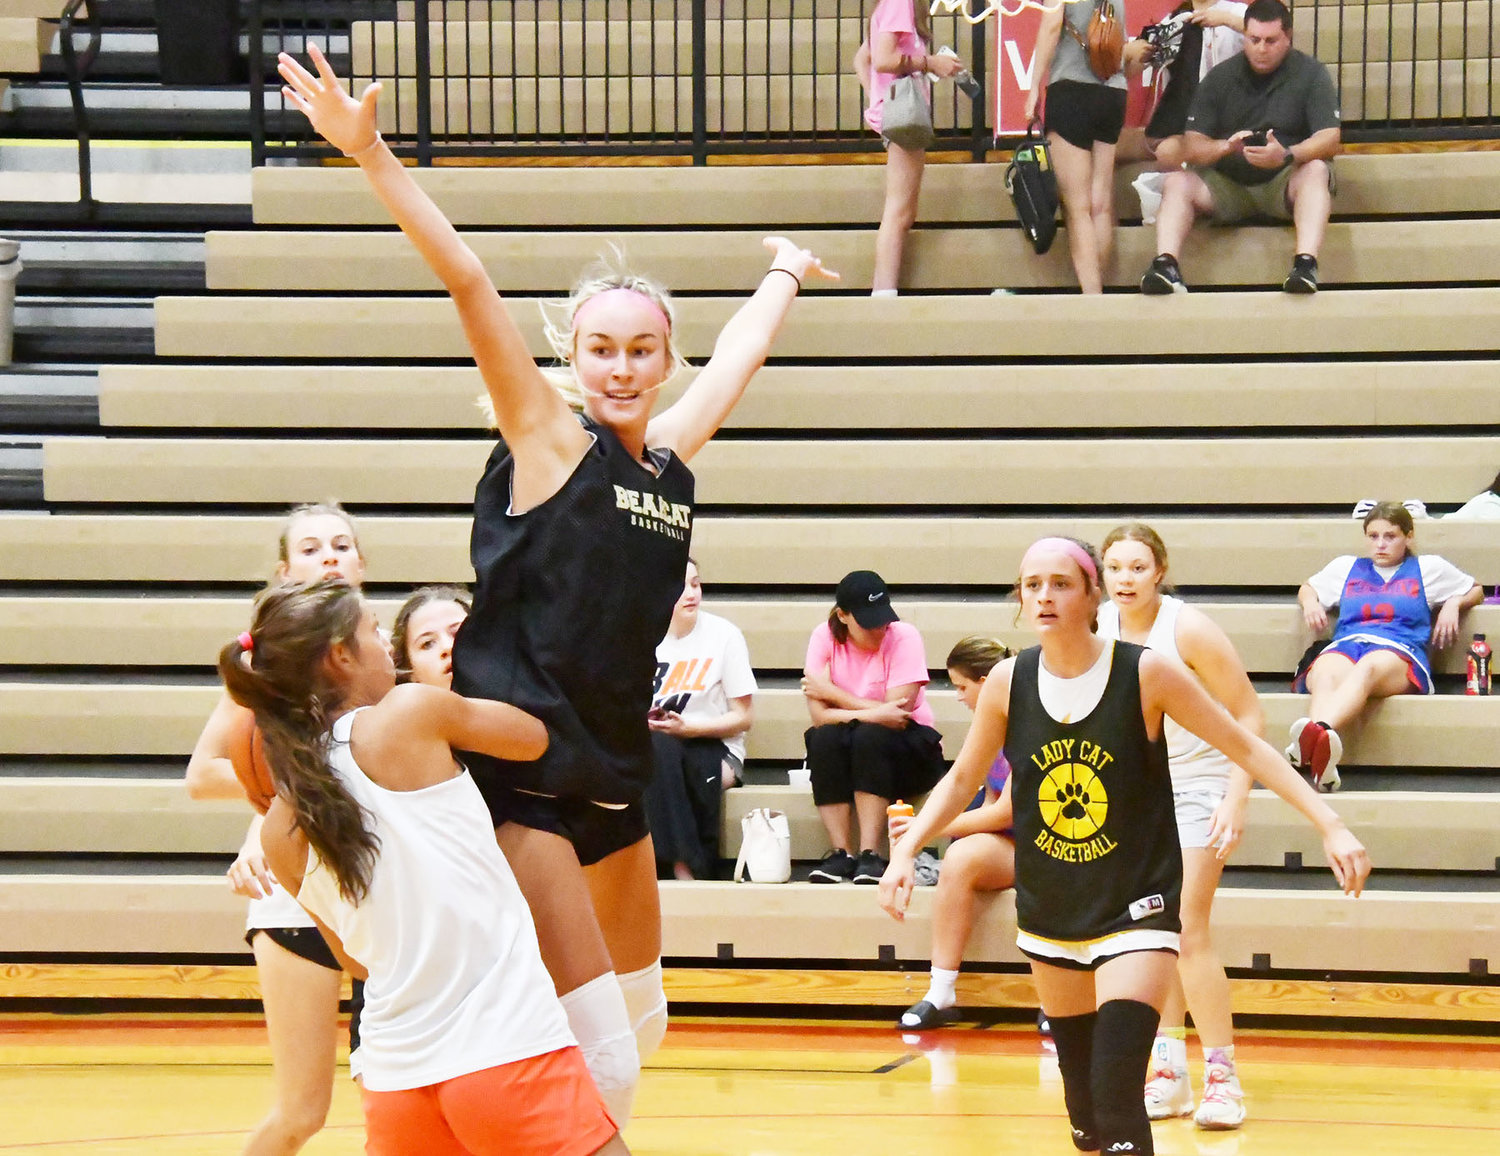 Macie Harman jumps out and defends a Hermann player while Jersey Bailey looks on at right.